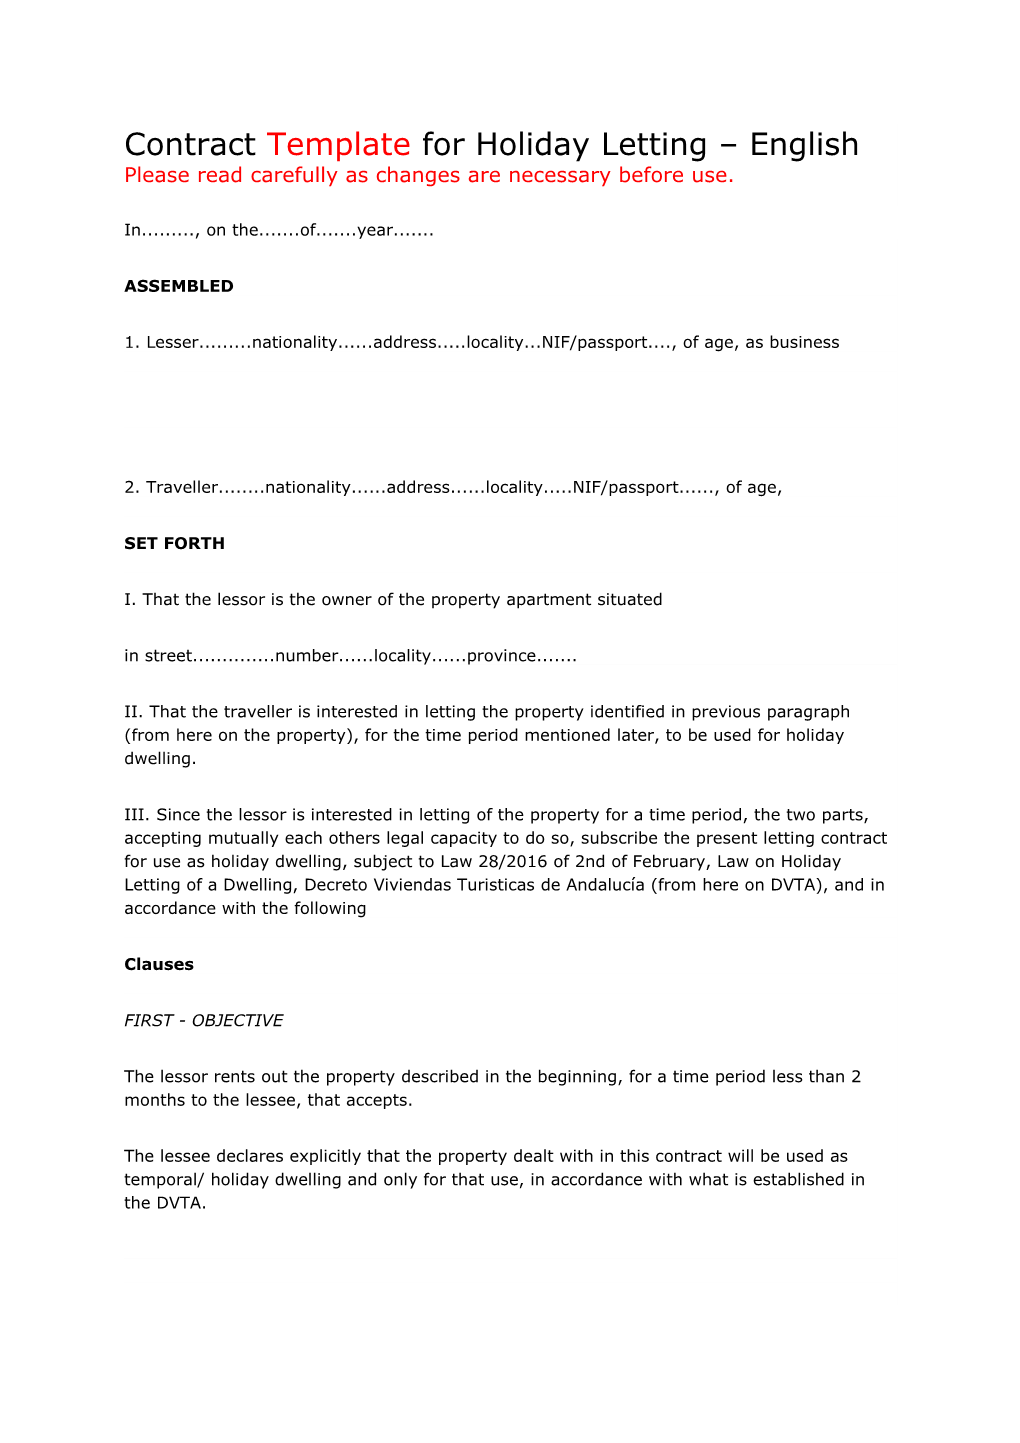 Contracttemplate for Holiday Letting English